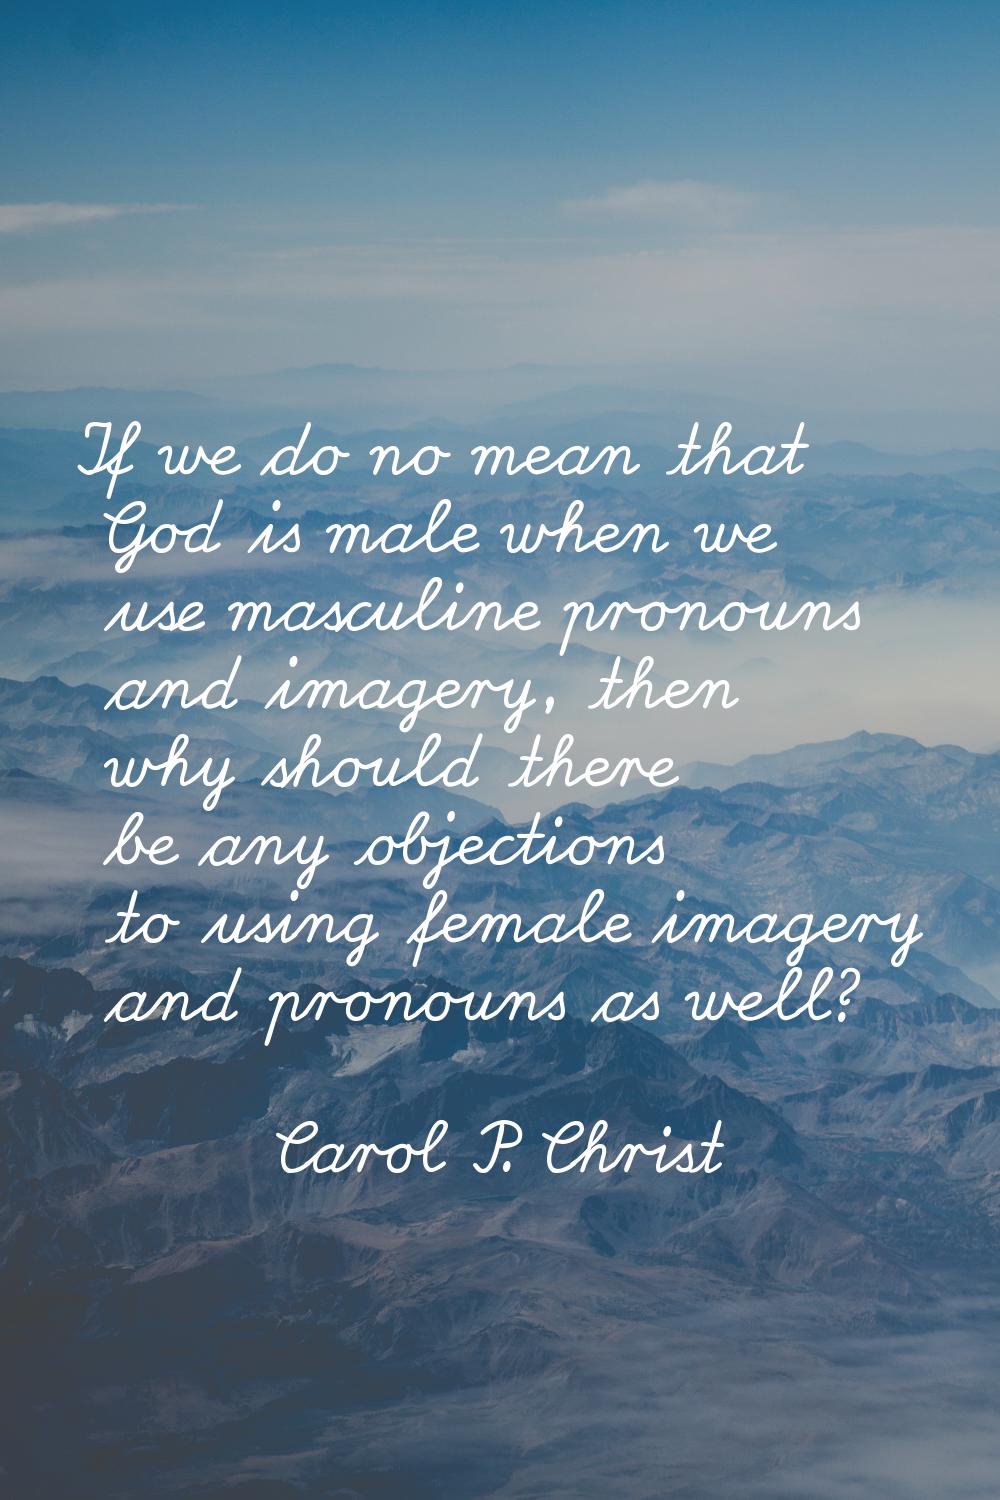 If we do no mean that God is male when we use masculine pronouns and imagery, then why should there